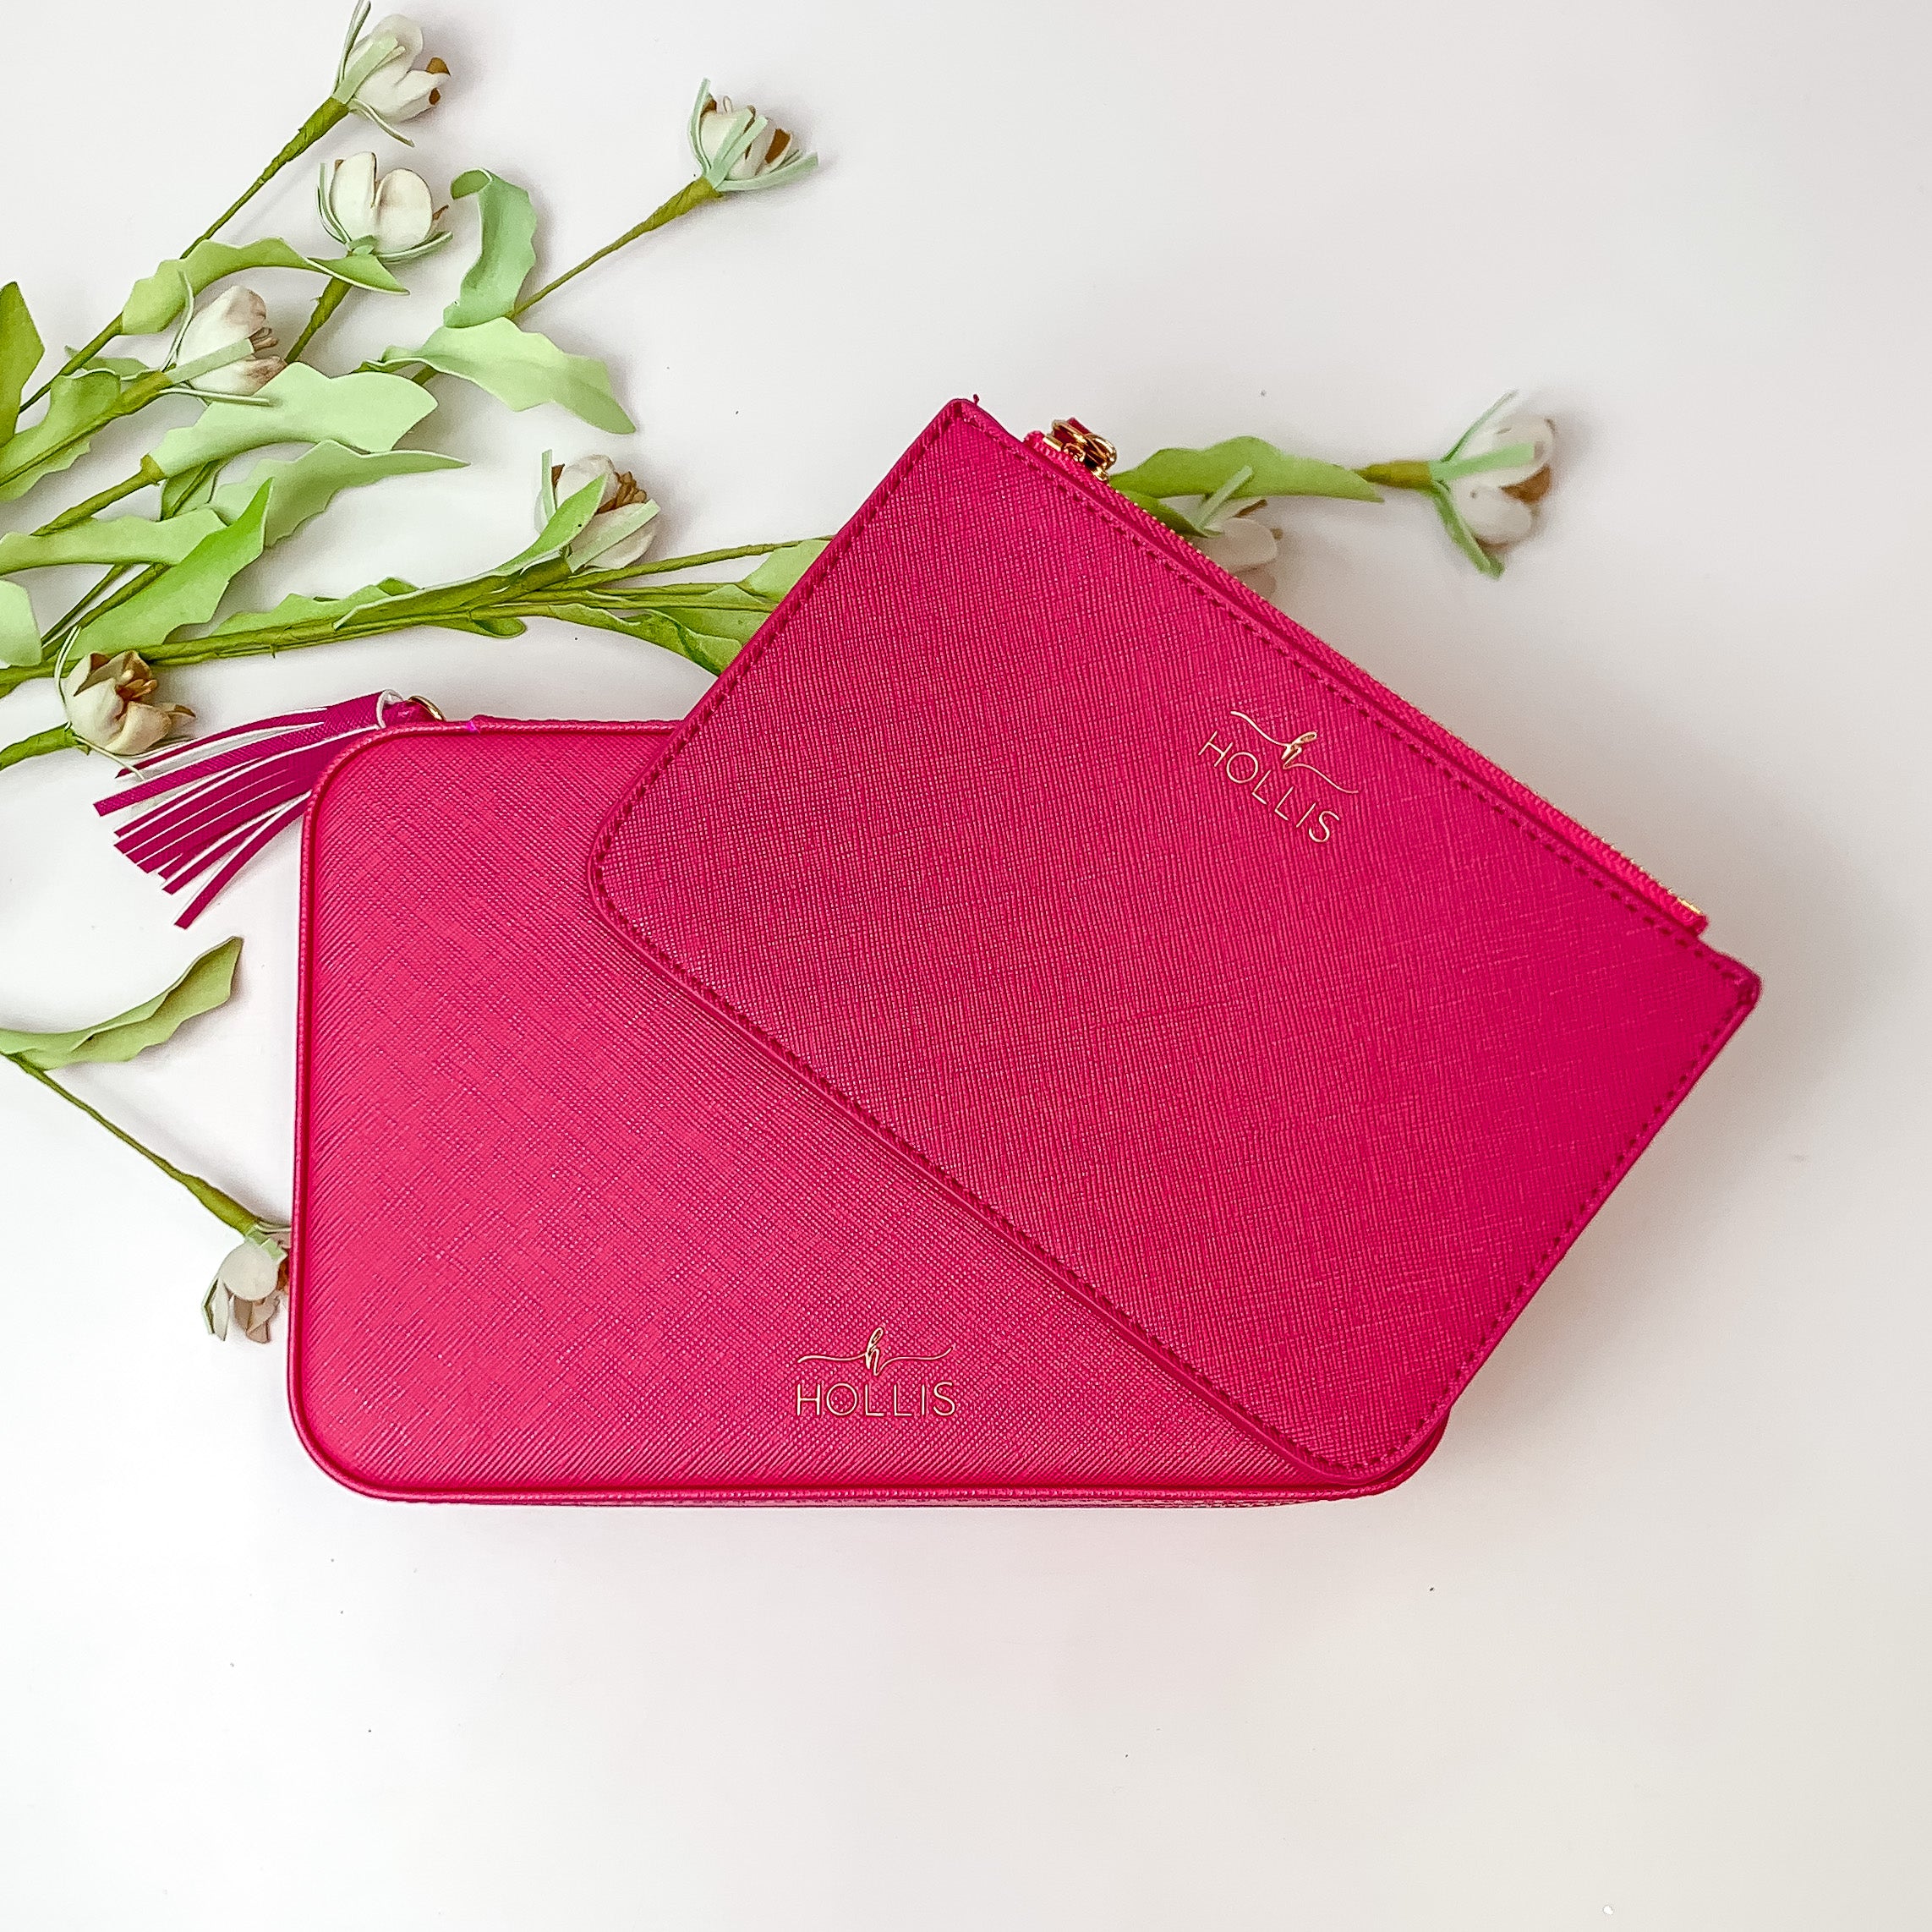 Two hot pink jewelry totes pictured on top of each other. These bags are pictured on a white background with green and white flowers in the background. 